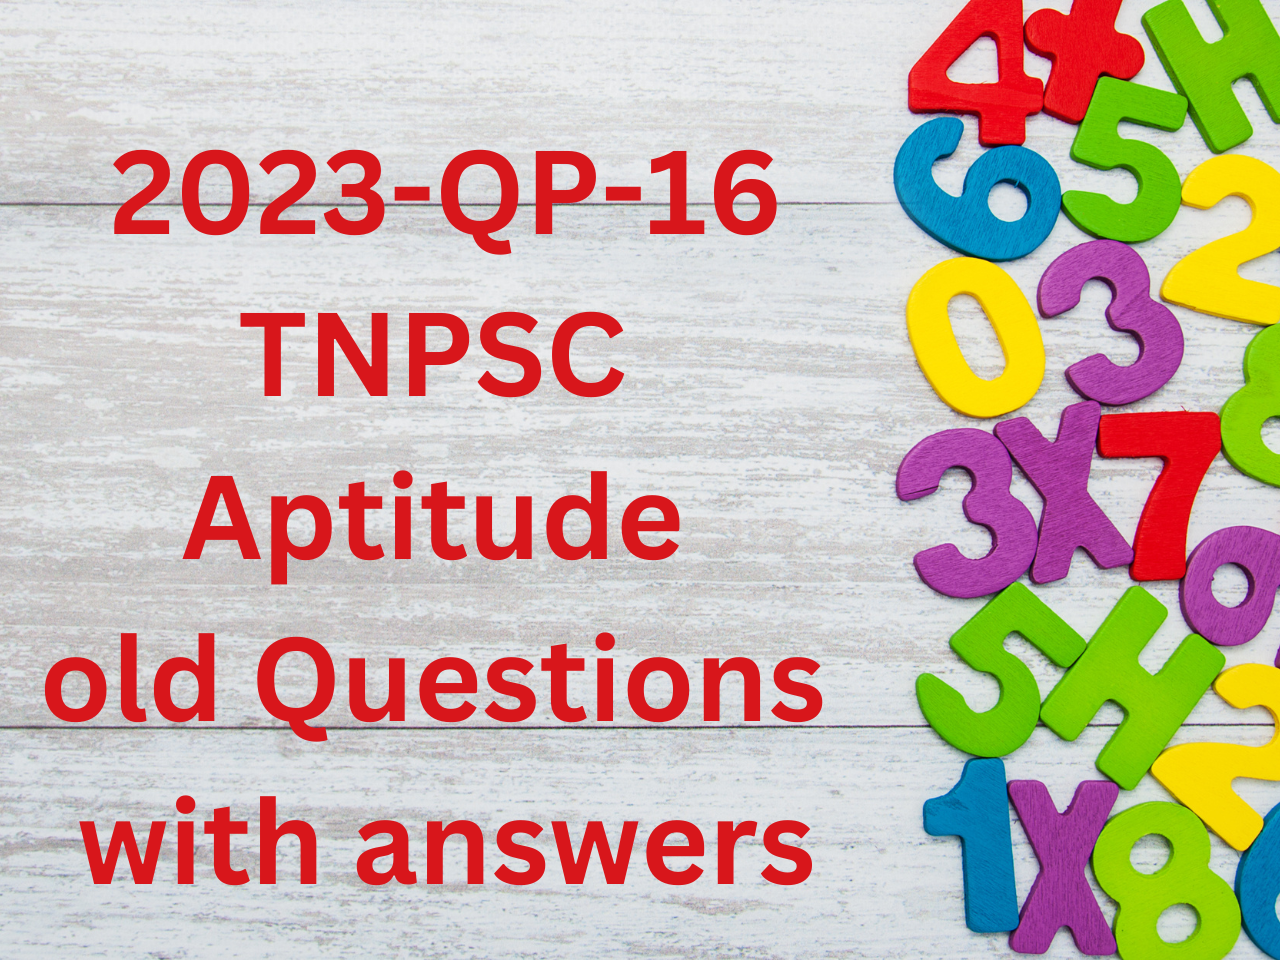 TNPSC Aptitude old Questions with answers